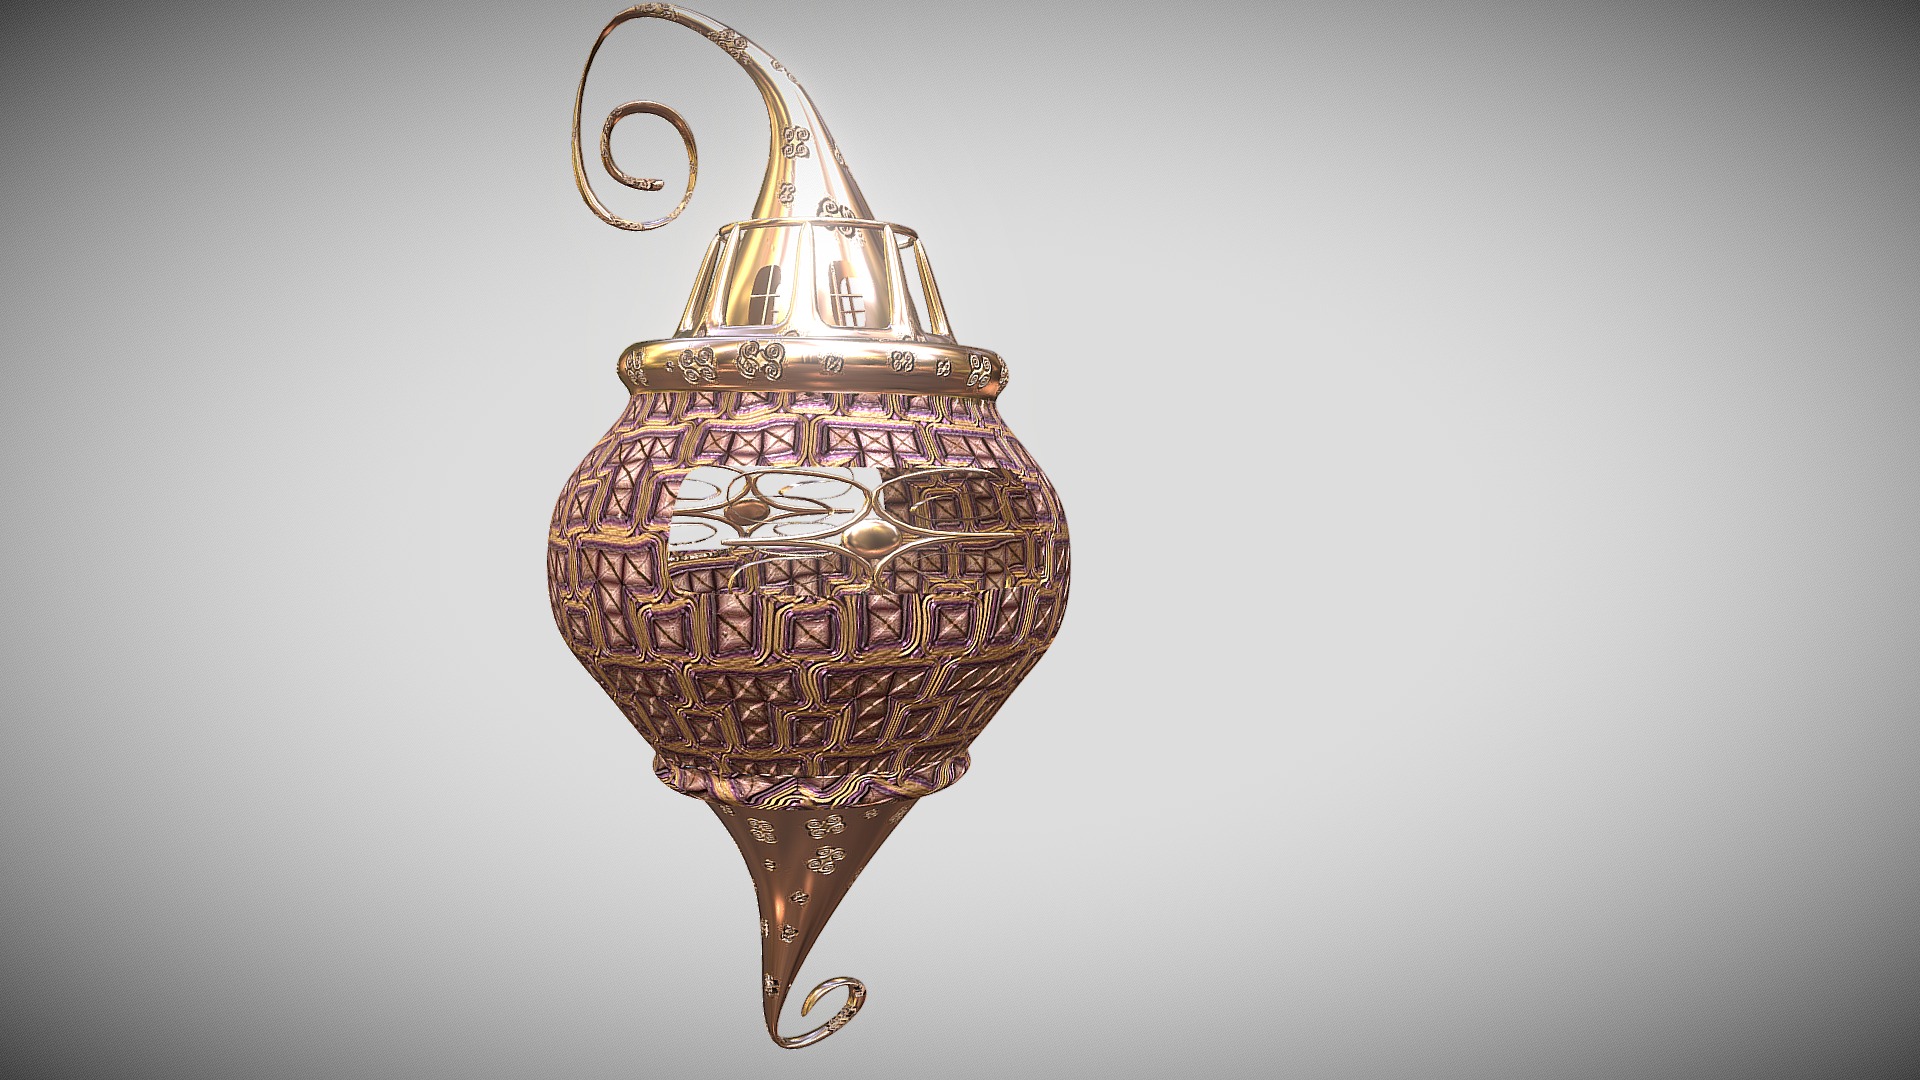 3D model Ornamental Object - This is a 3D model of the Ornamental Object. The 3D model is about a gold and silver trophy.